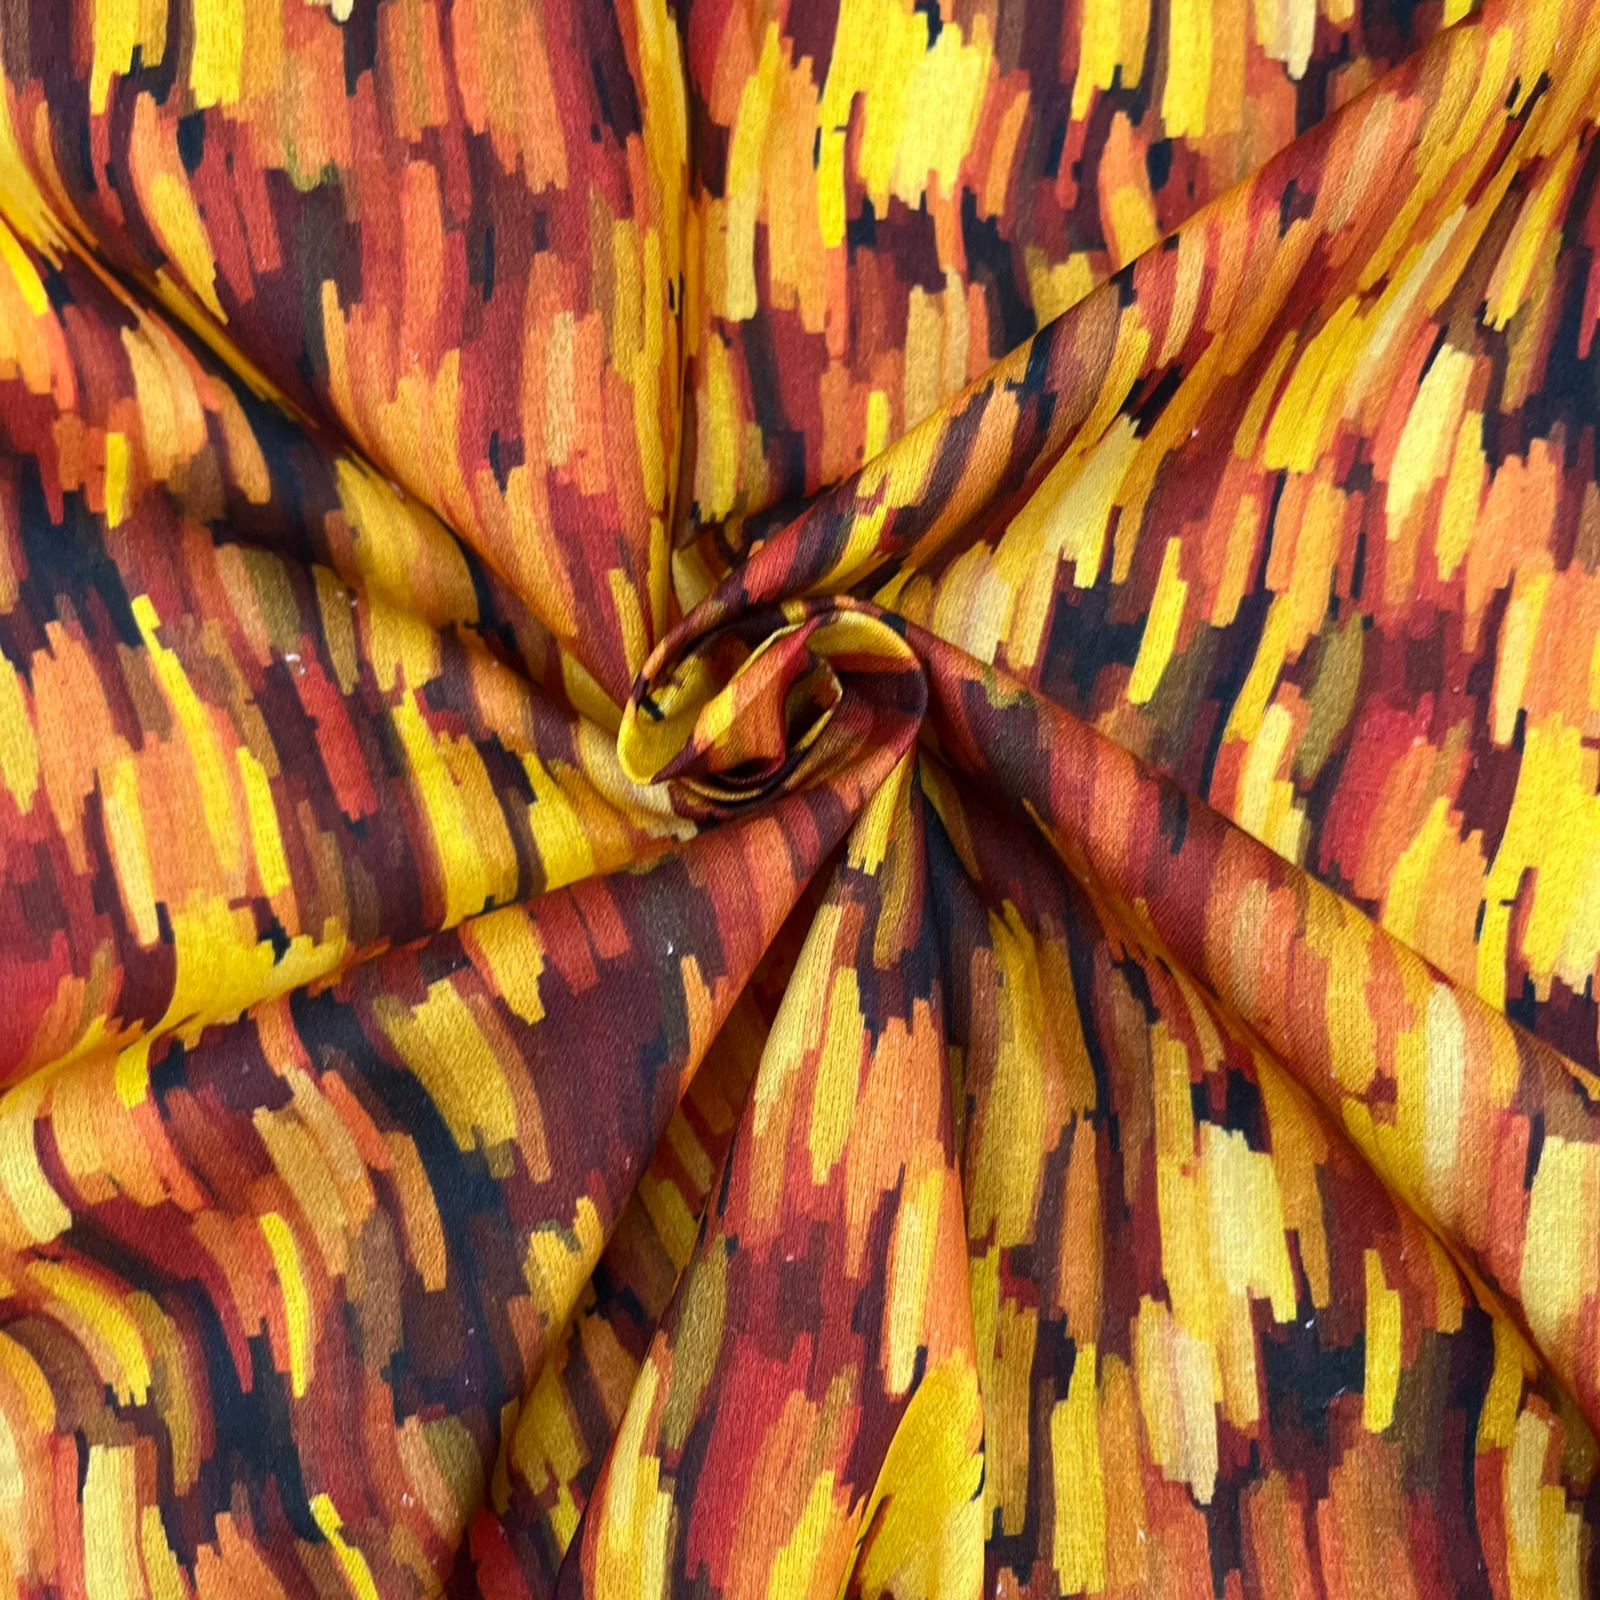 Digital Print 100% Cotton, Artist Collection, 'Strokes-Caramel', 44" Wide - Printed Cottons